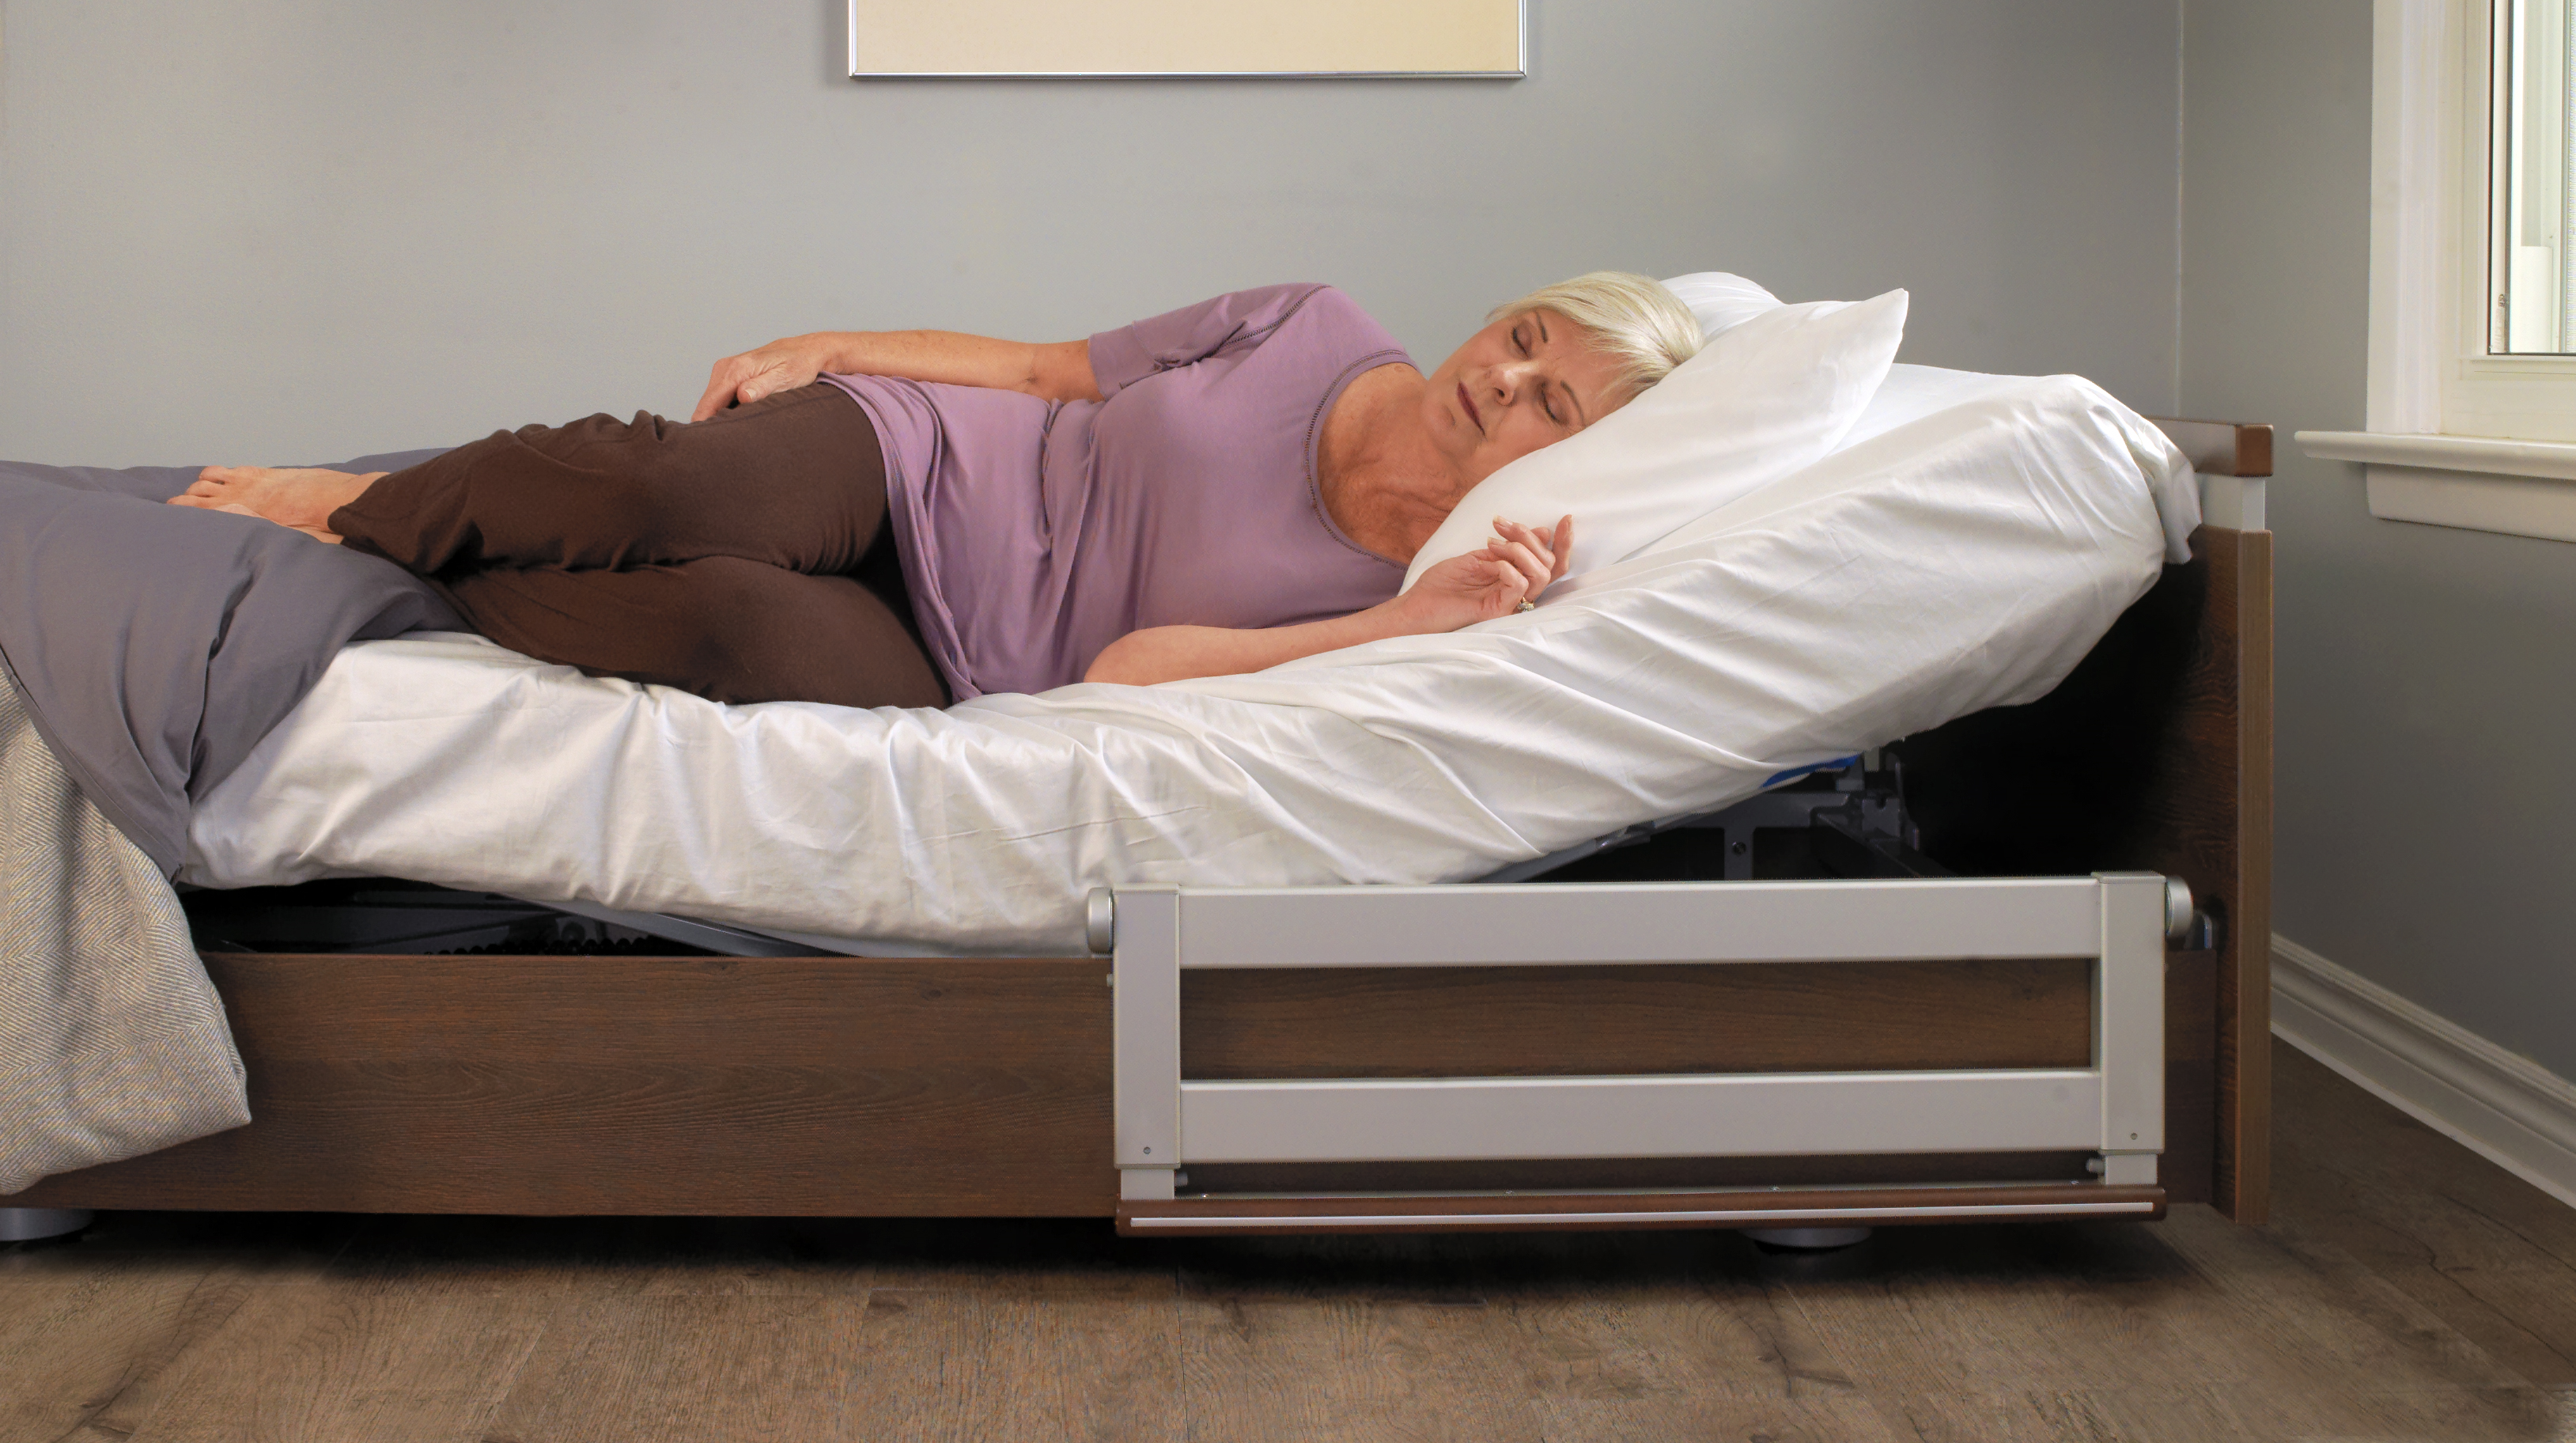 An elderly woman lying asleep in a hospital bed with an adjustable side rail in a calm room, captured in a Single Post on Elementor.